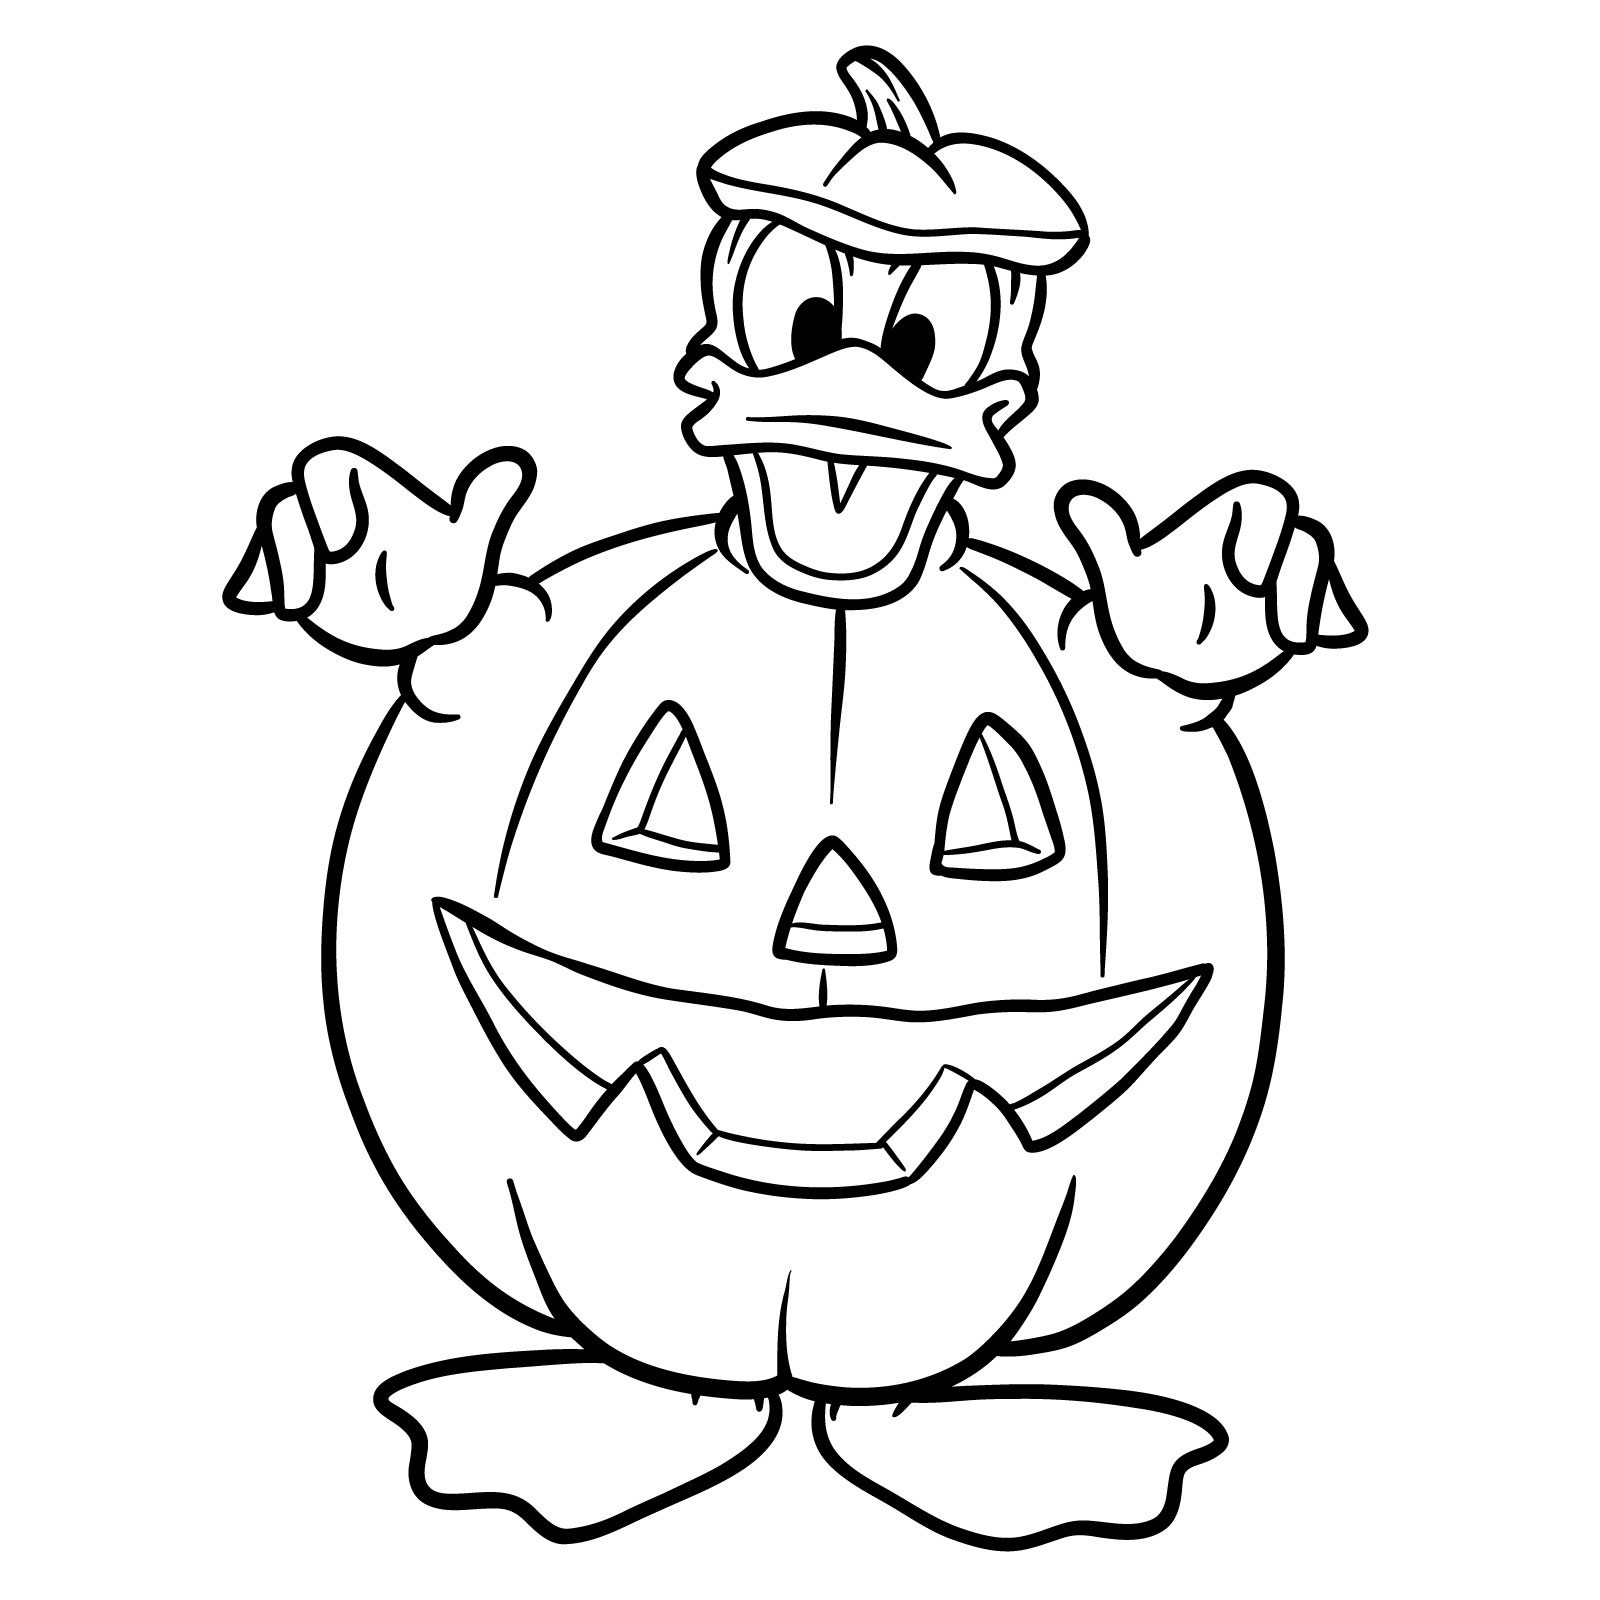 How to draw Halloween Donald Duck in a jack o'lantern - final step